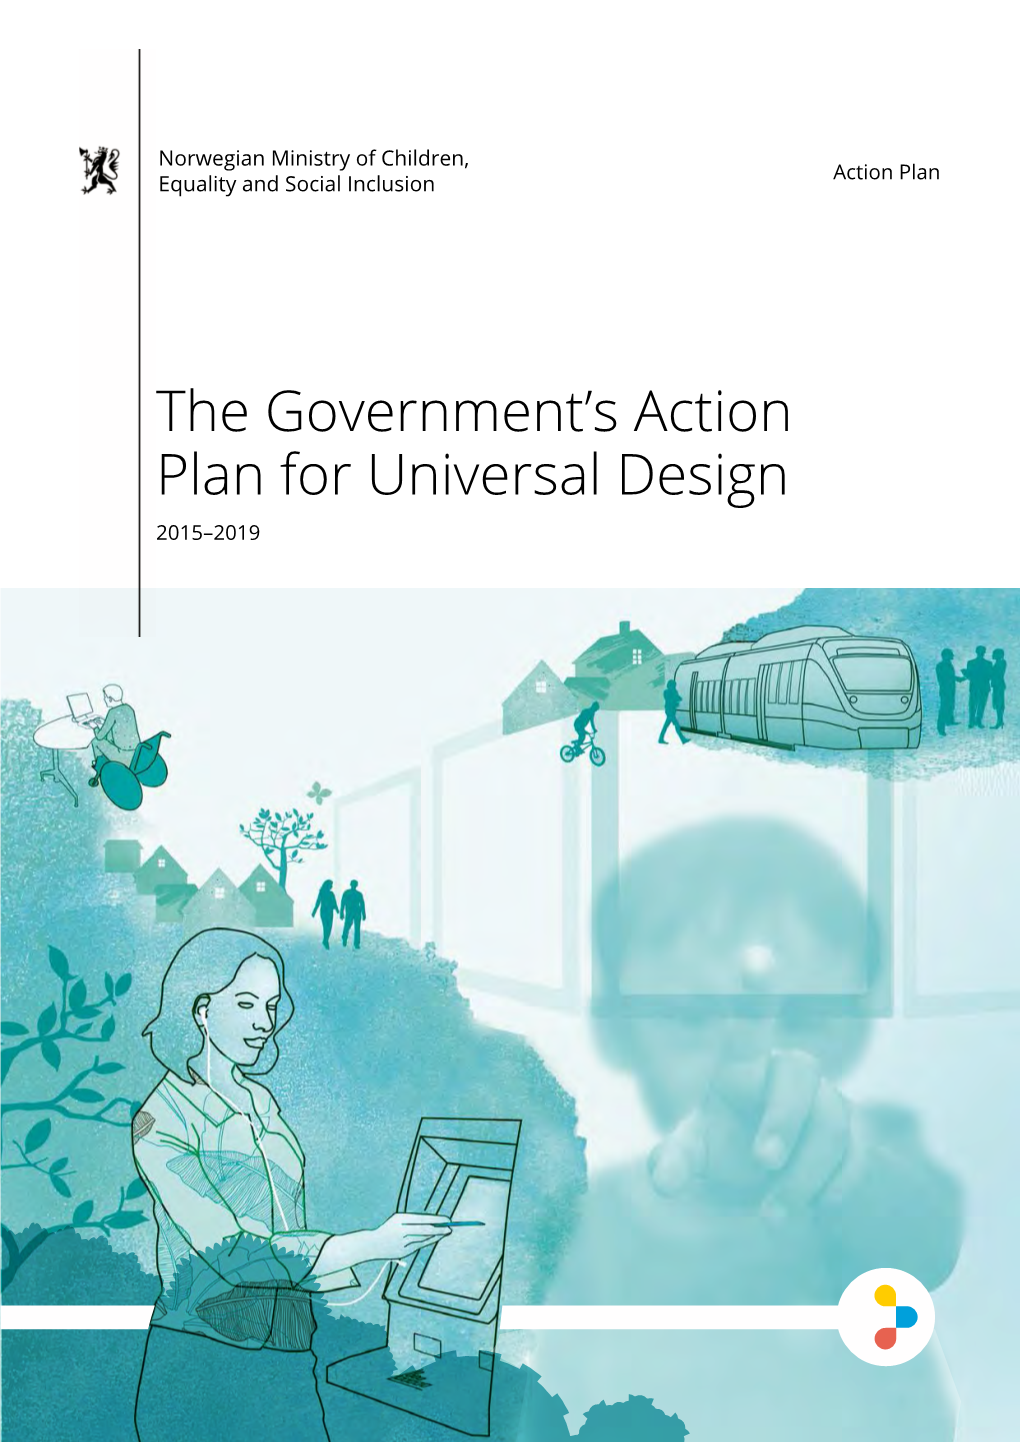 The Government's Action Plan for Universal Design